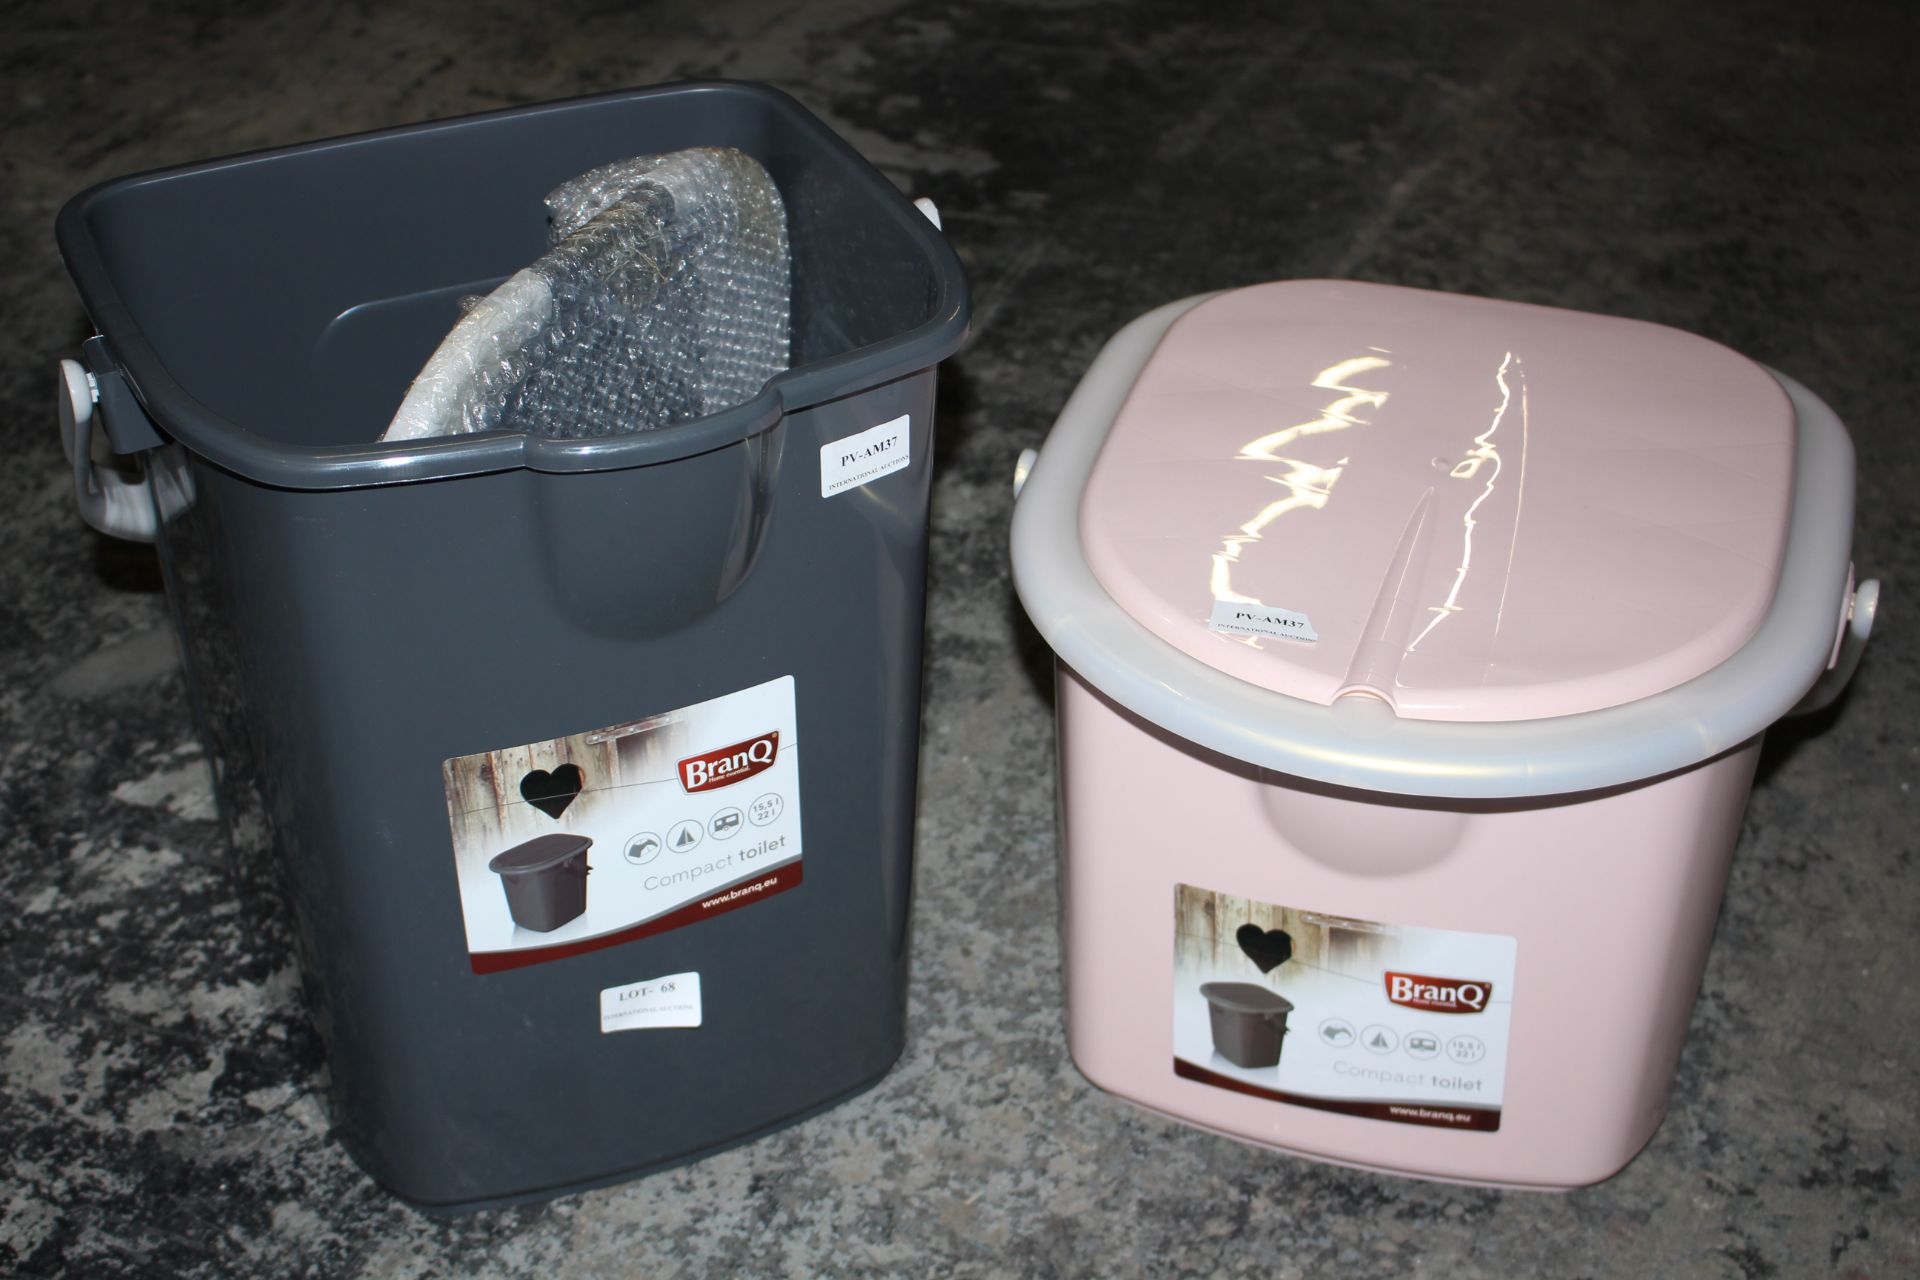 2X UNBOXED BRAN Q COMPACT TOILETS 22LITRE COMBINED RRP £70.00Condition ReportAppraisal Available